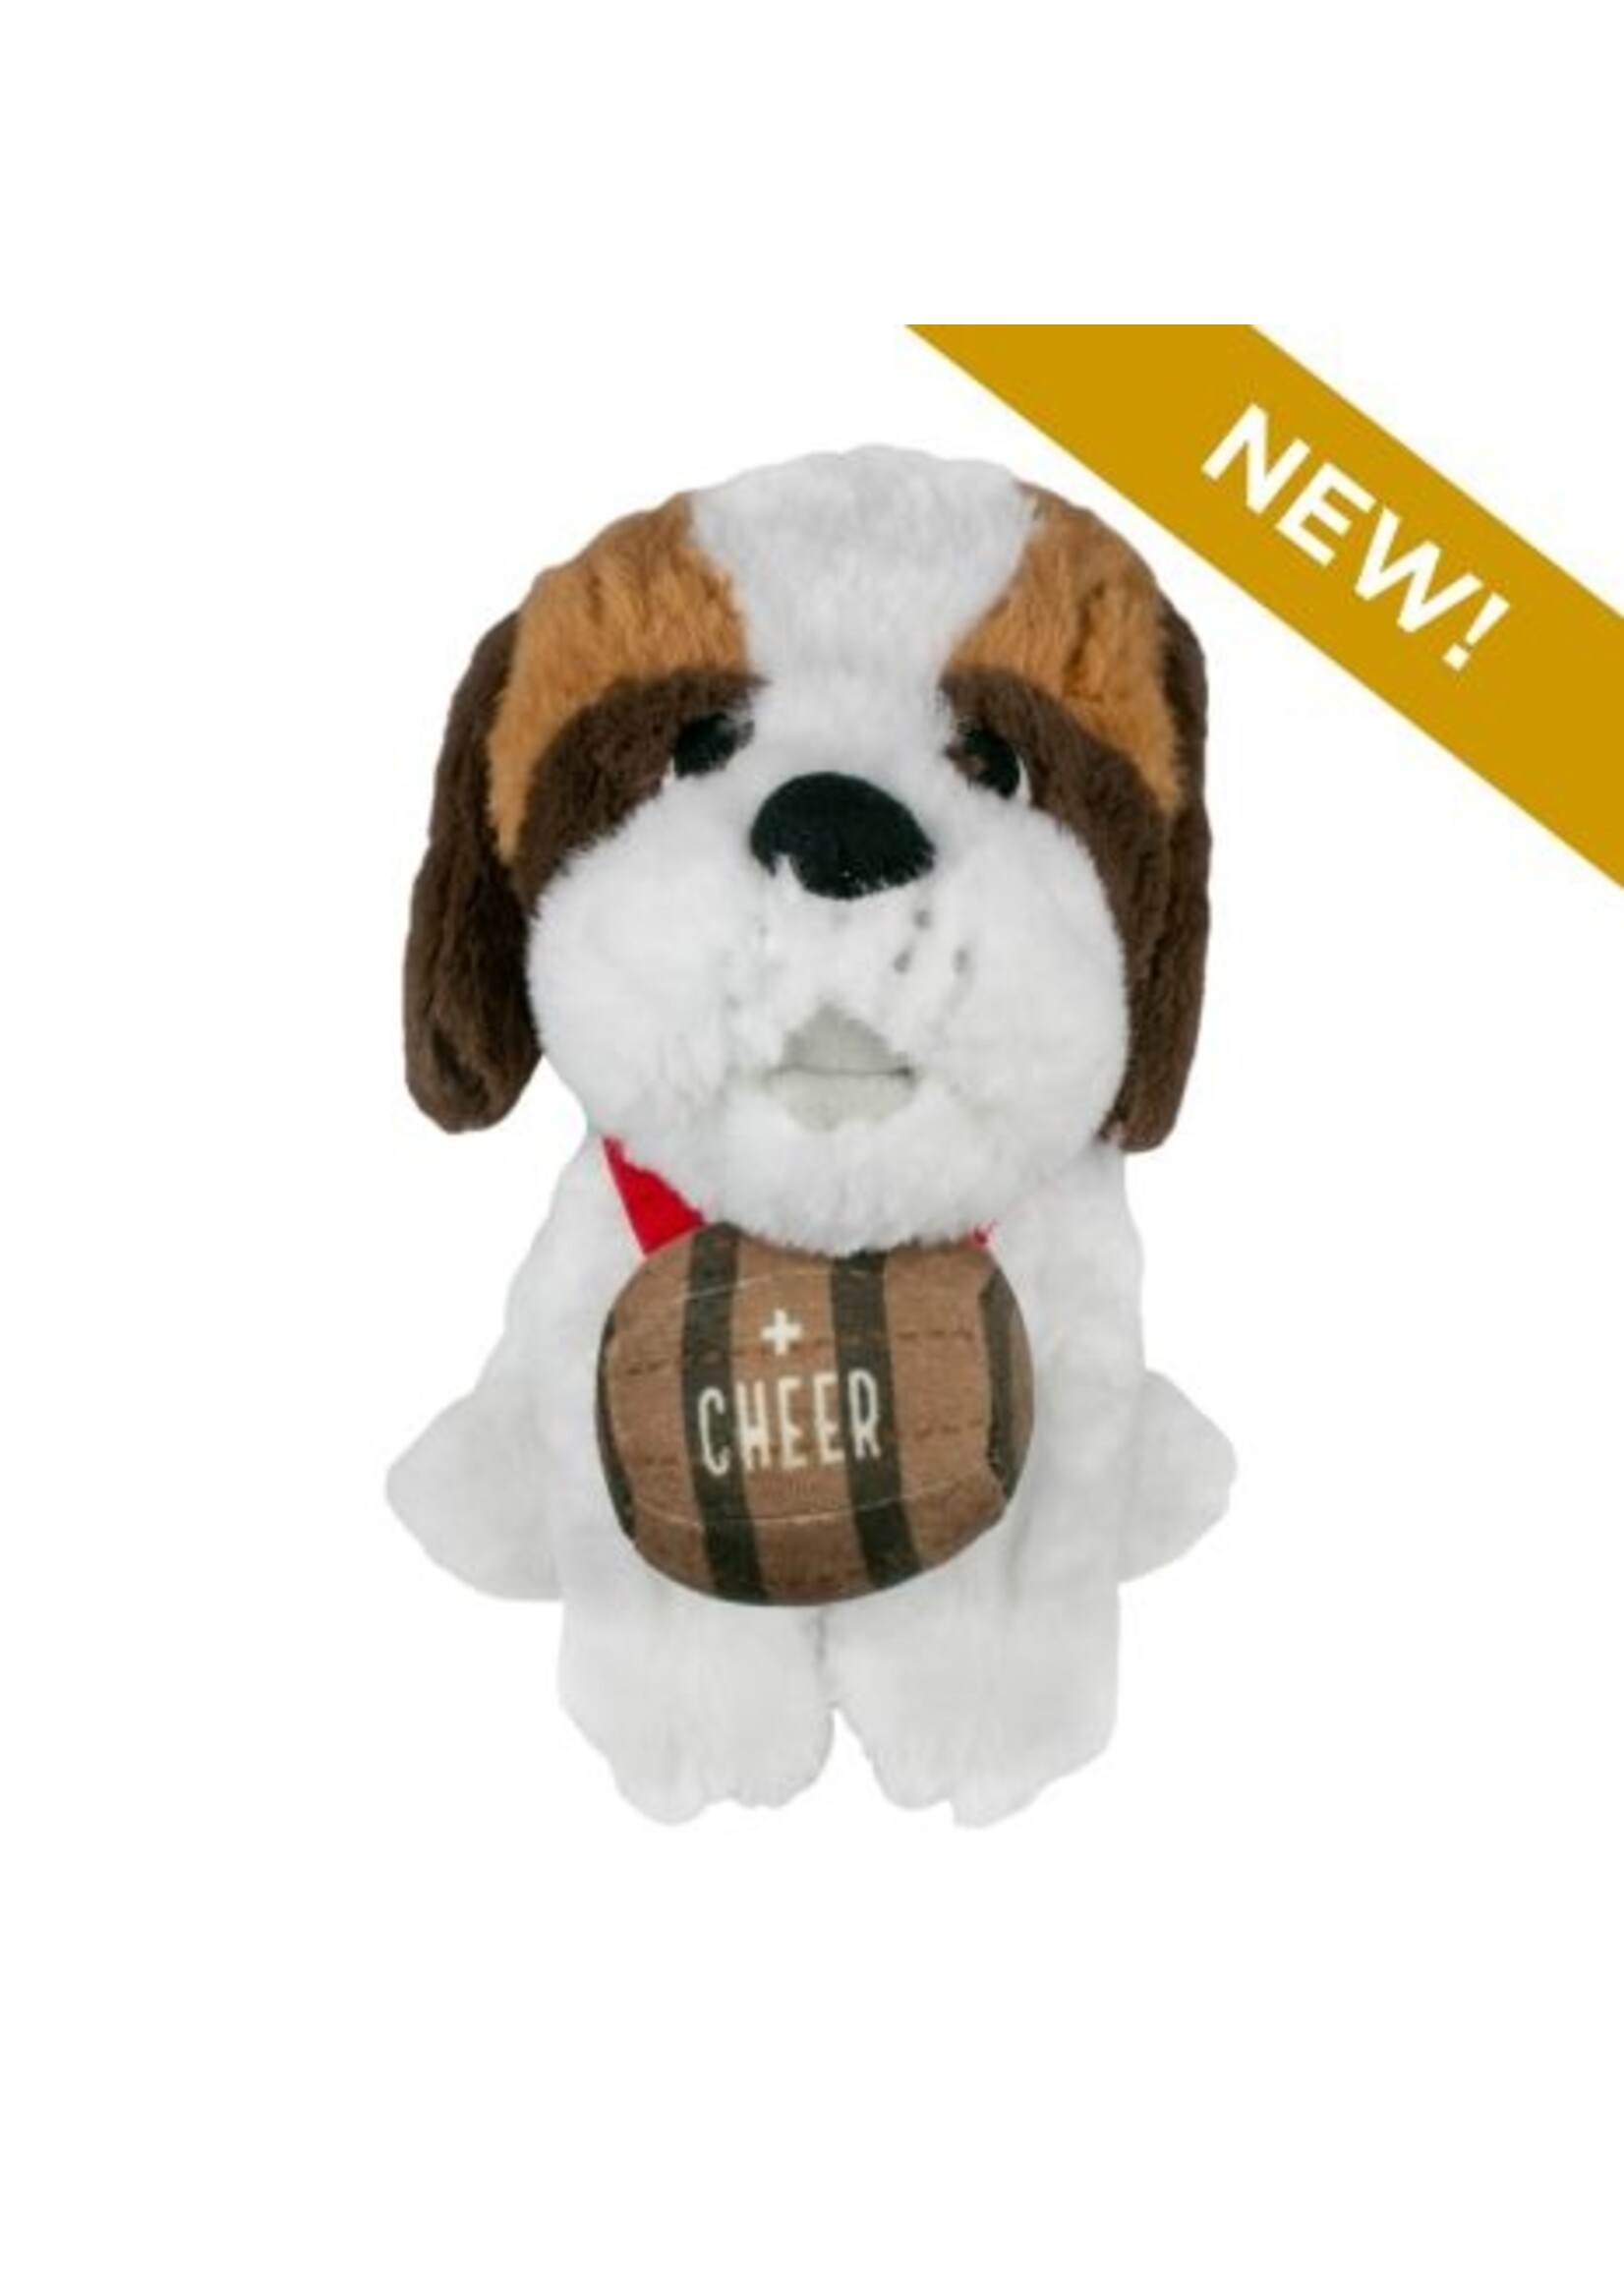 Tall Tails Tall Tails Cheer Dog w/Squeaker